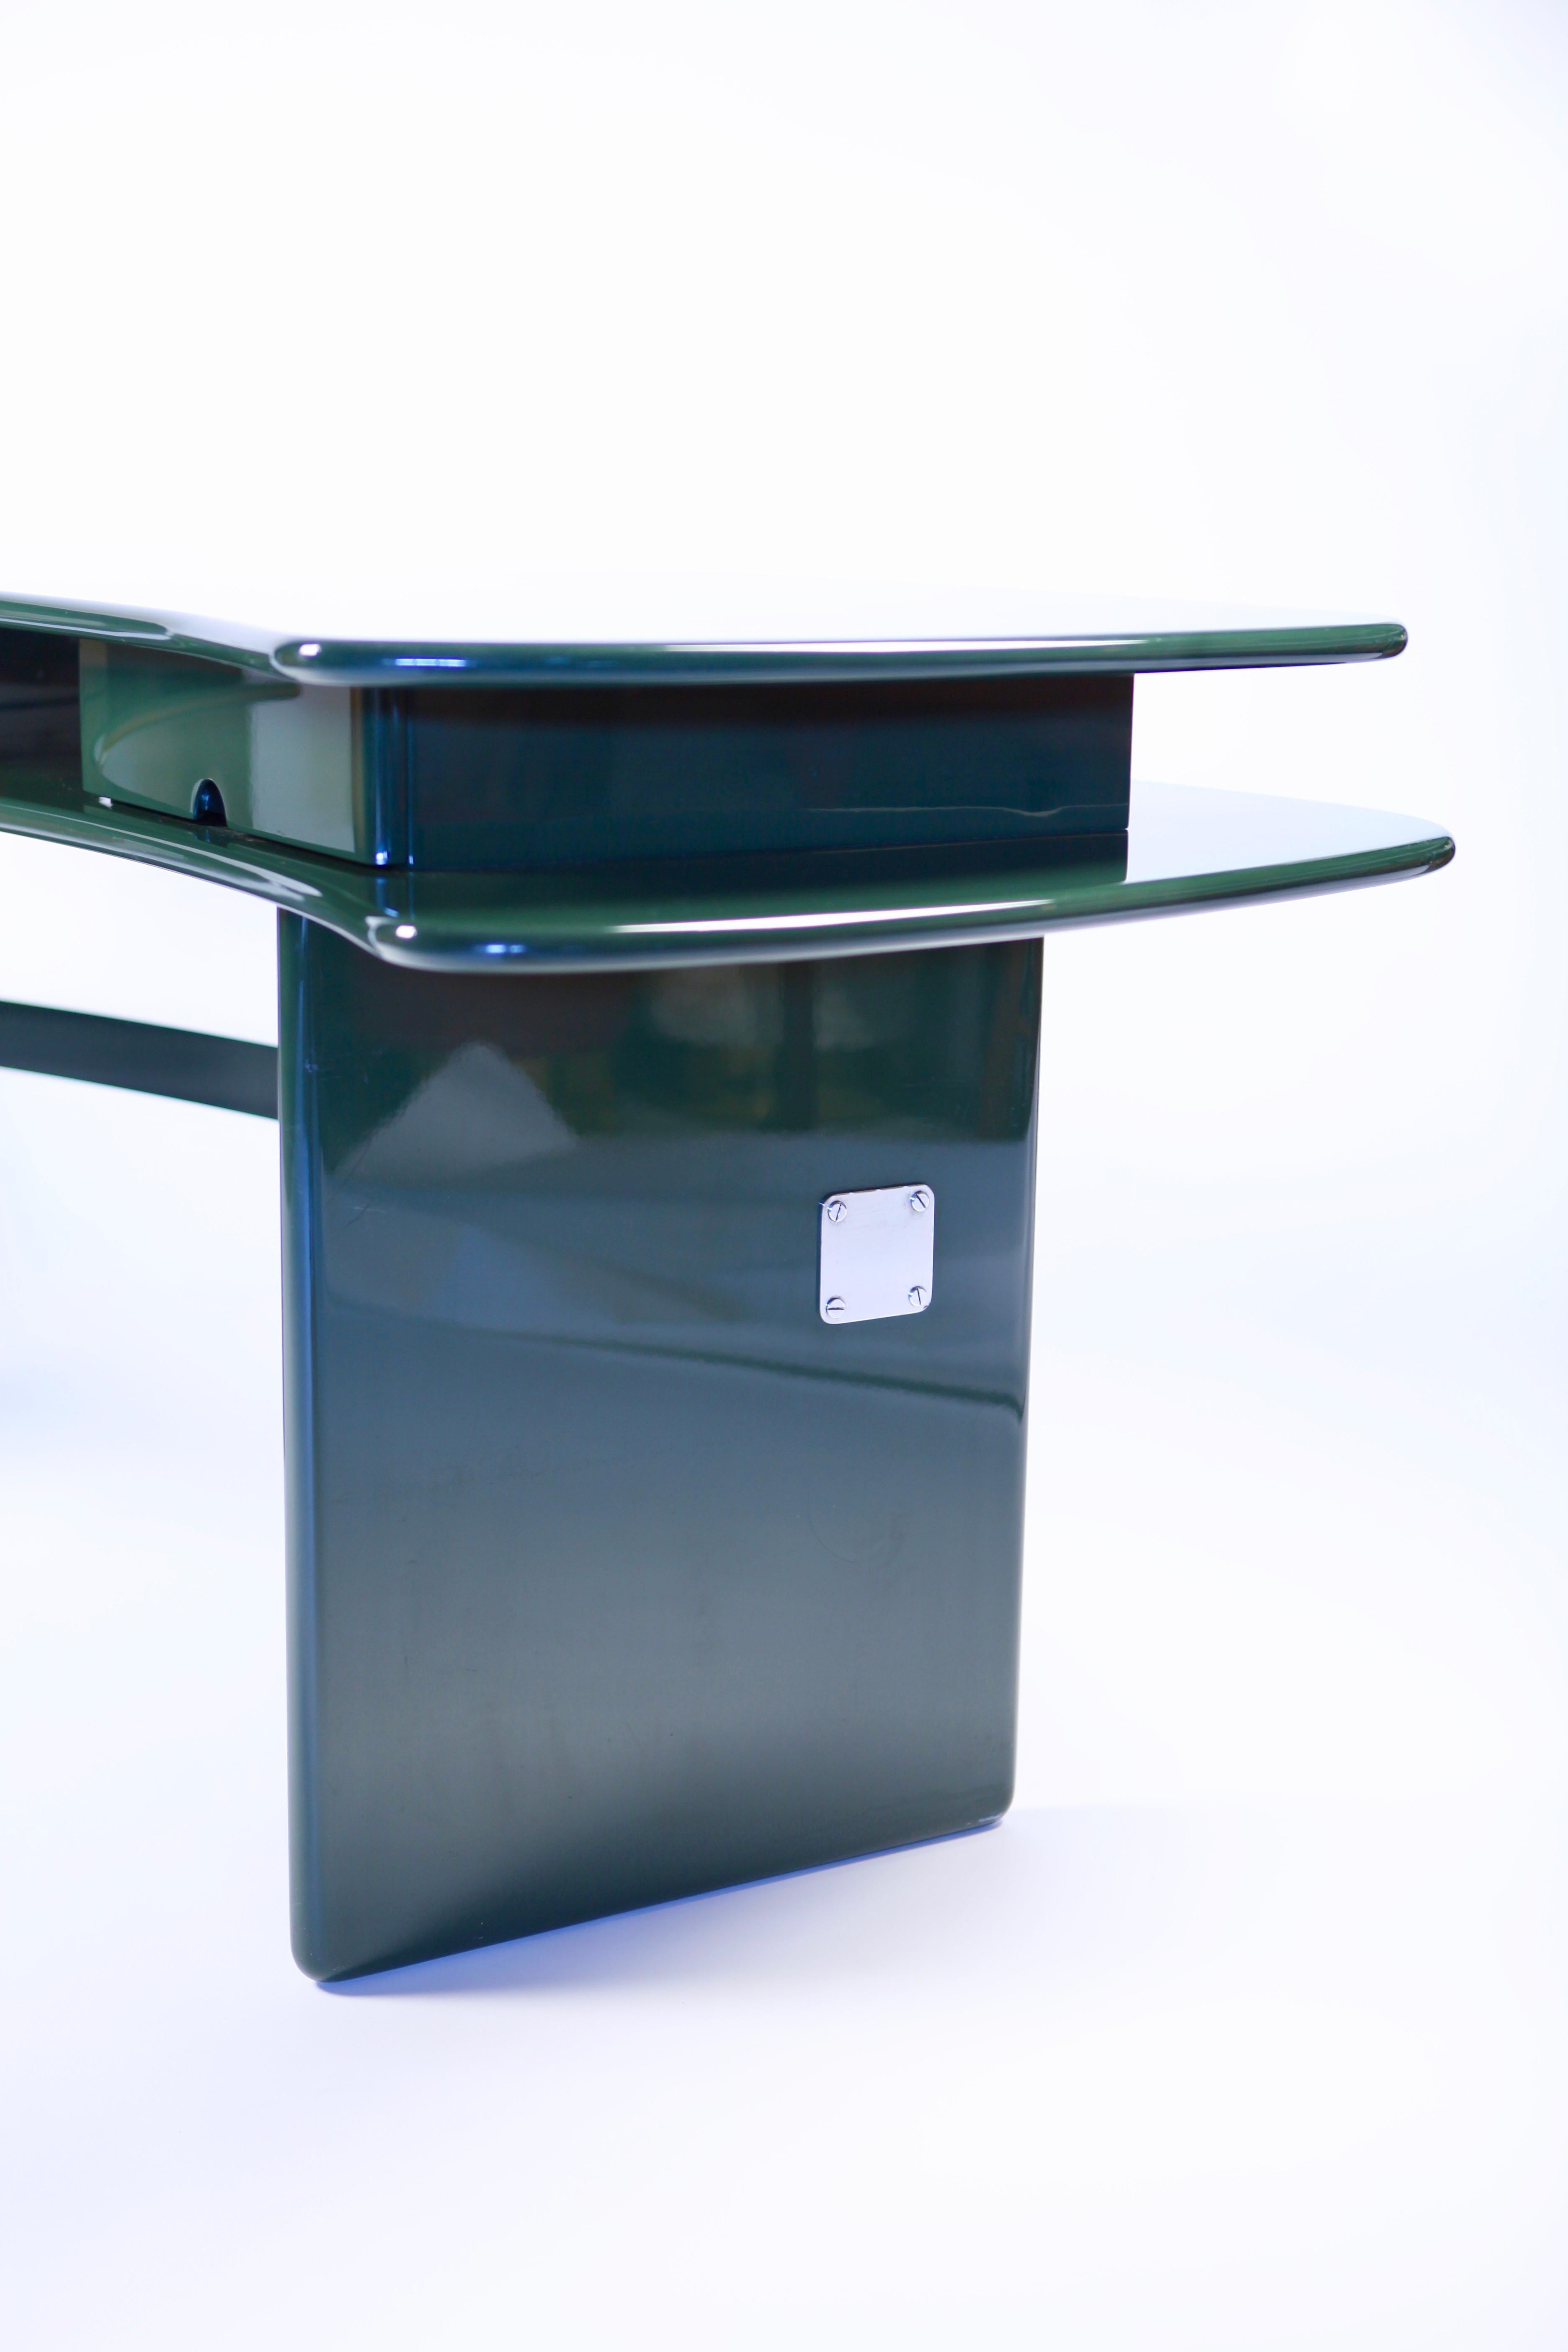 Luigi Caccia Dominioni, SCR7 writing desk with 2 offset surfaces in dark green lacquered wood, 2 drawers, band in polished chrome-plated brass. Edition Azucena, executed in Italy, 1979.
This desk is a perfect example of the possibilities created by